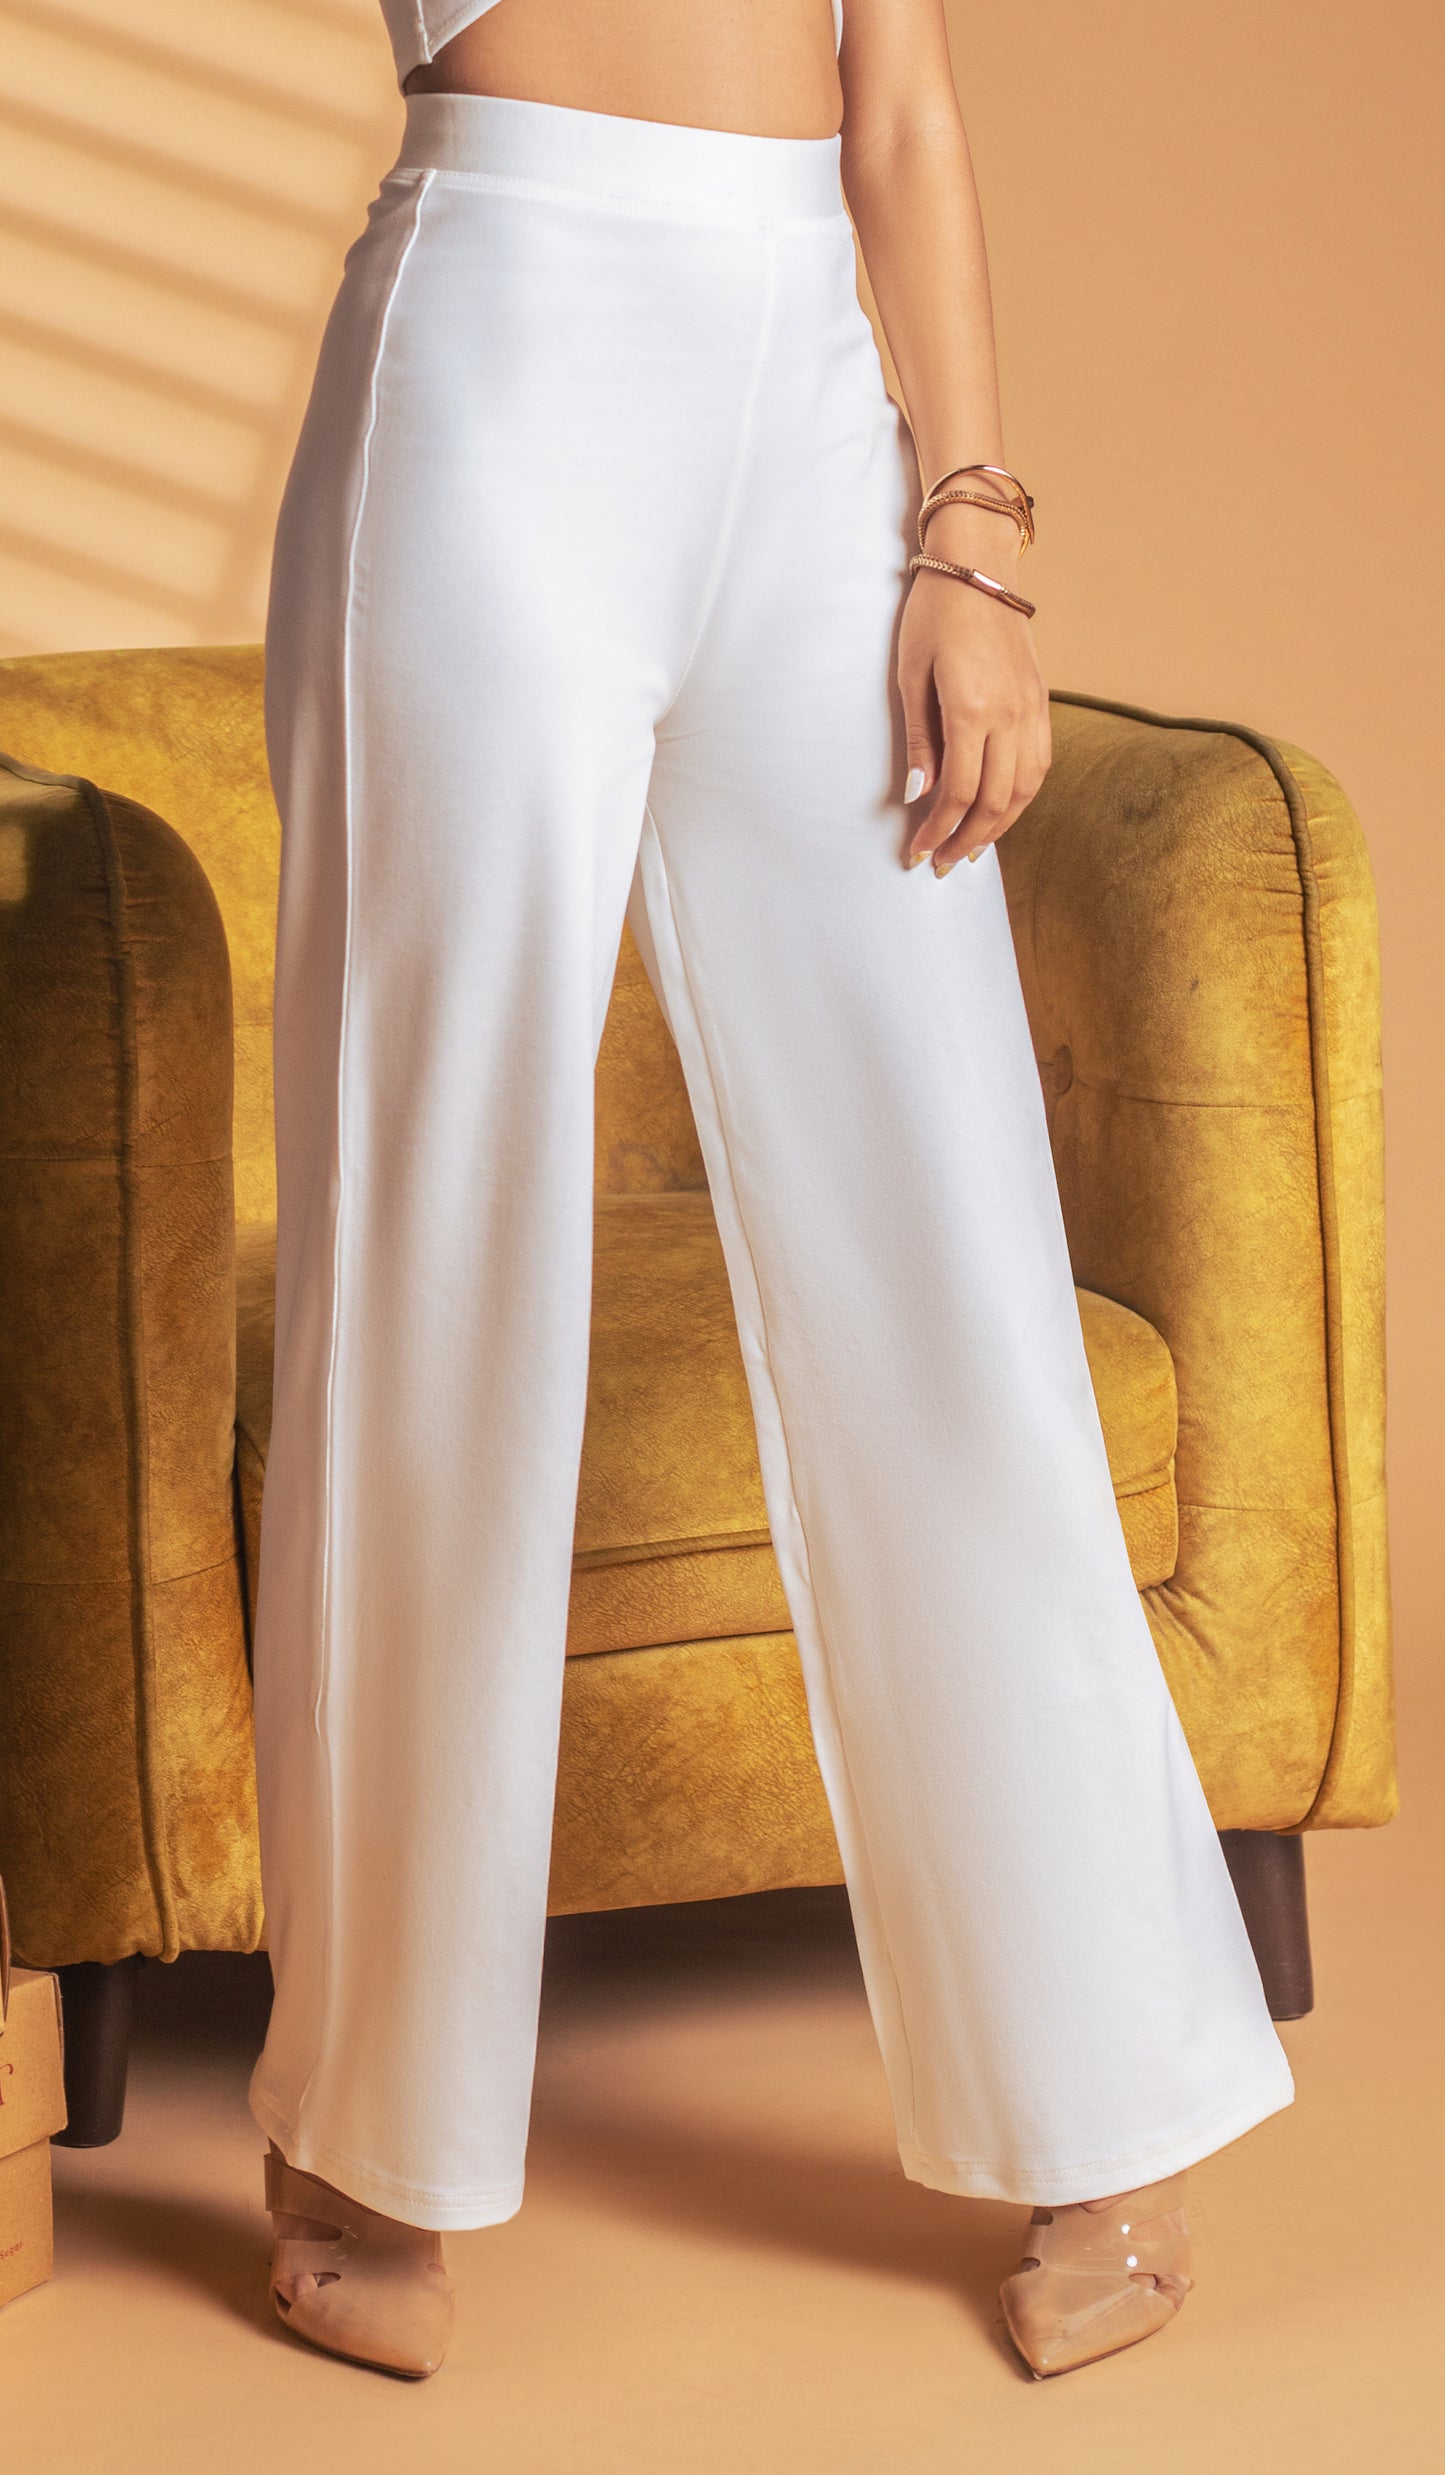 The White Party- Pant